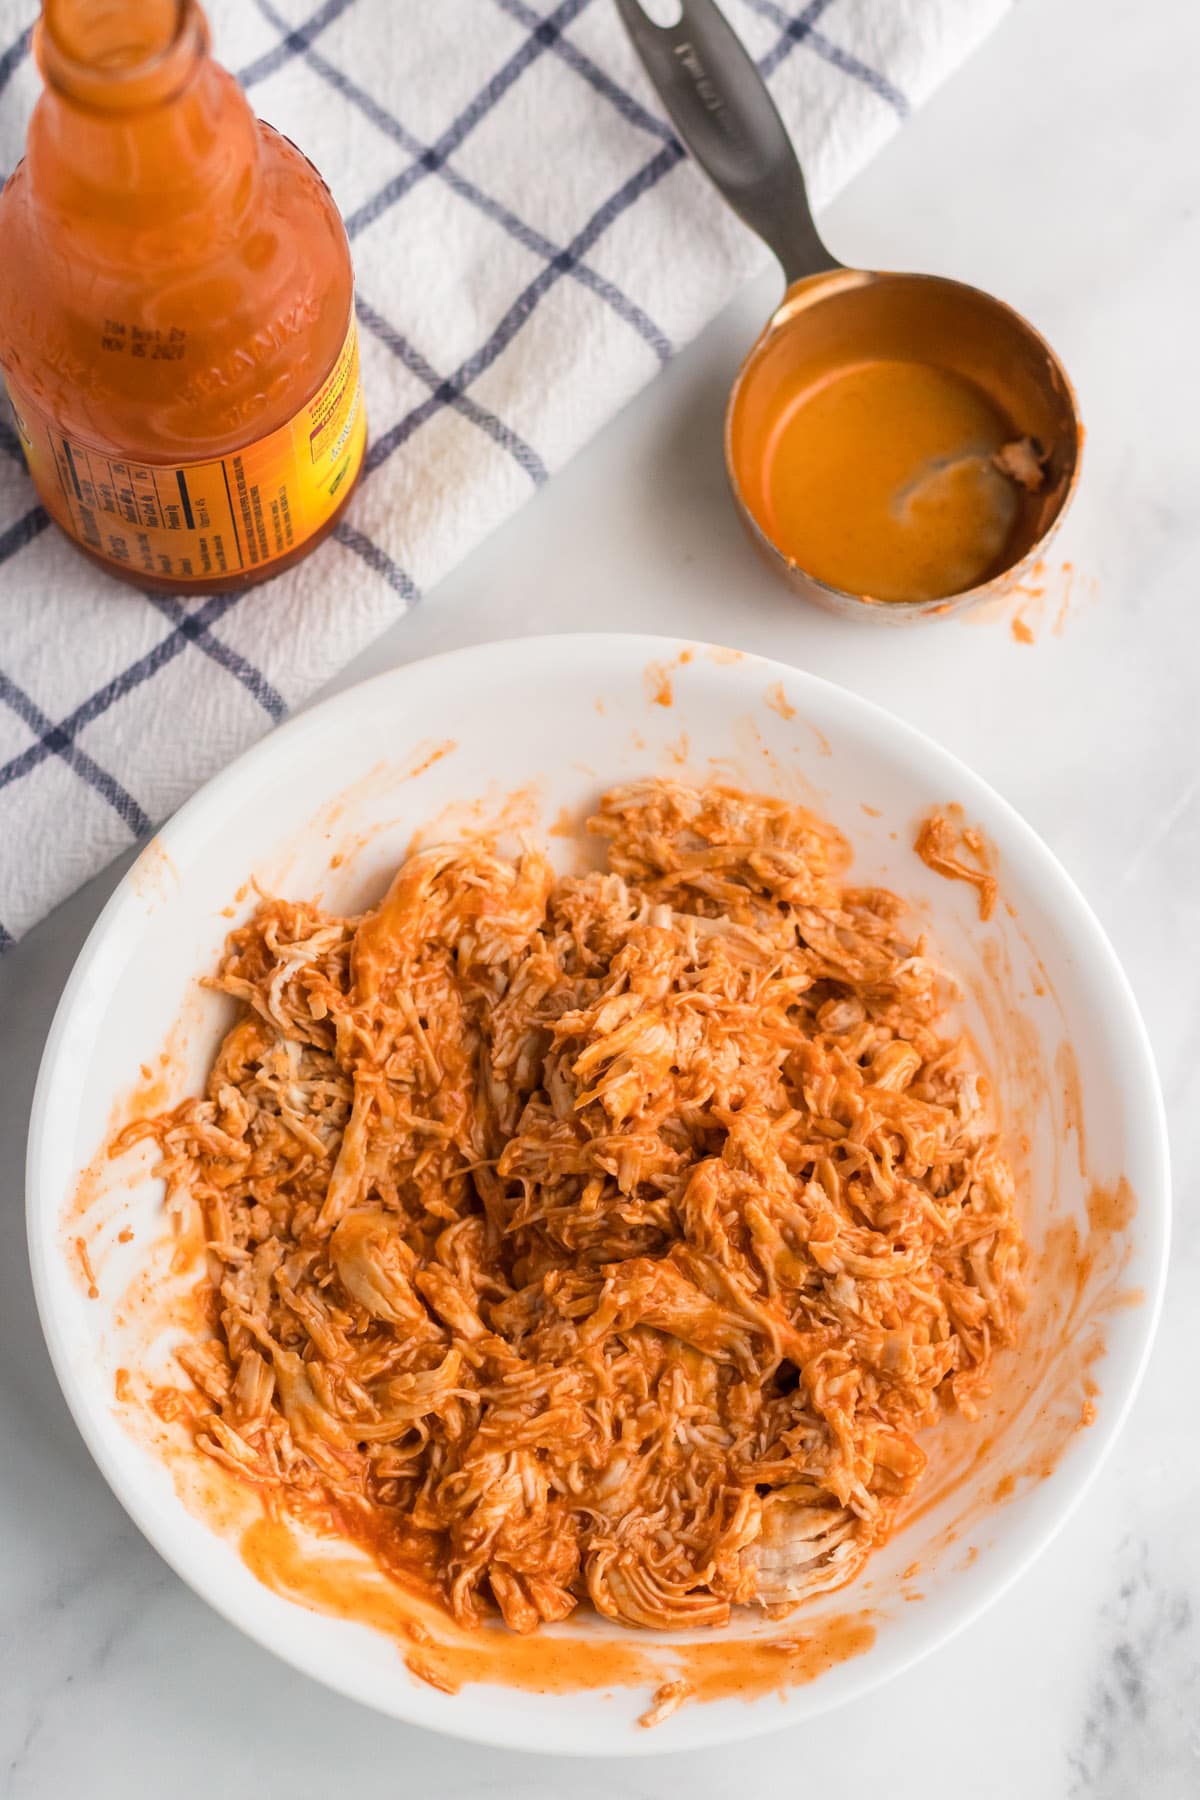 Pour buffalo sauce on top of shredded chicken and mix well.